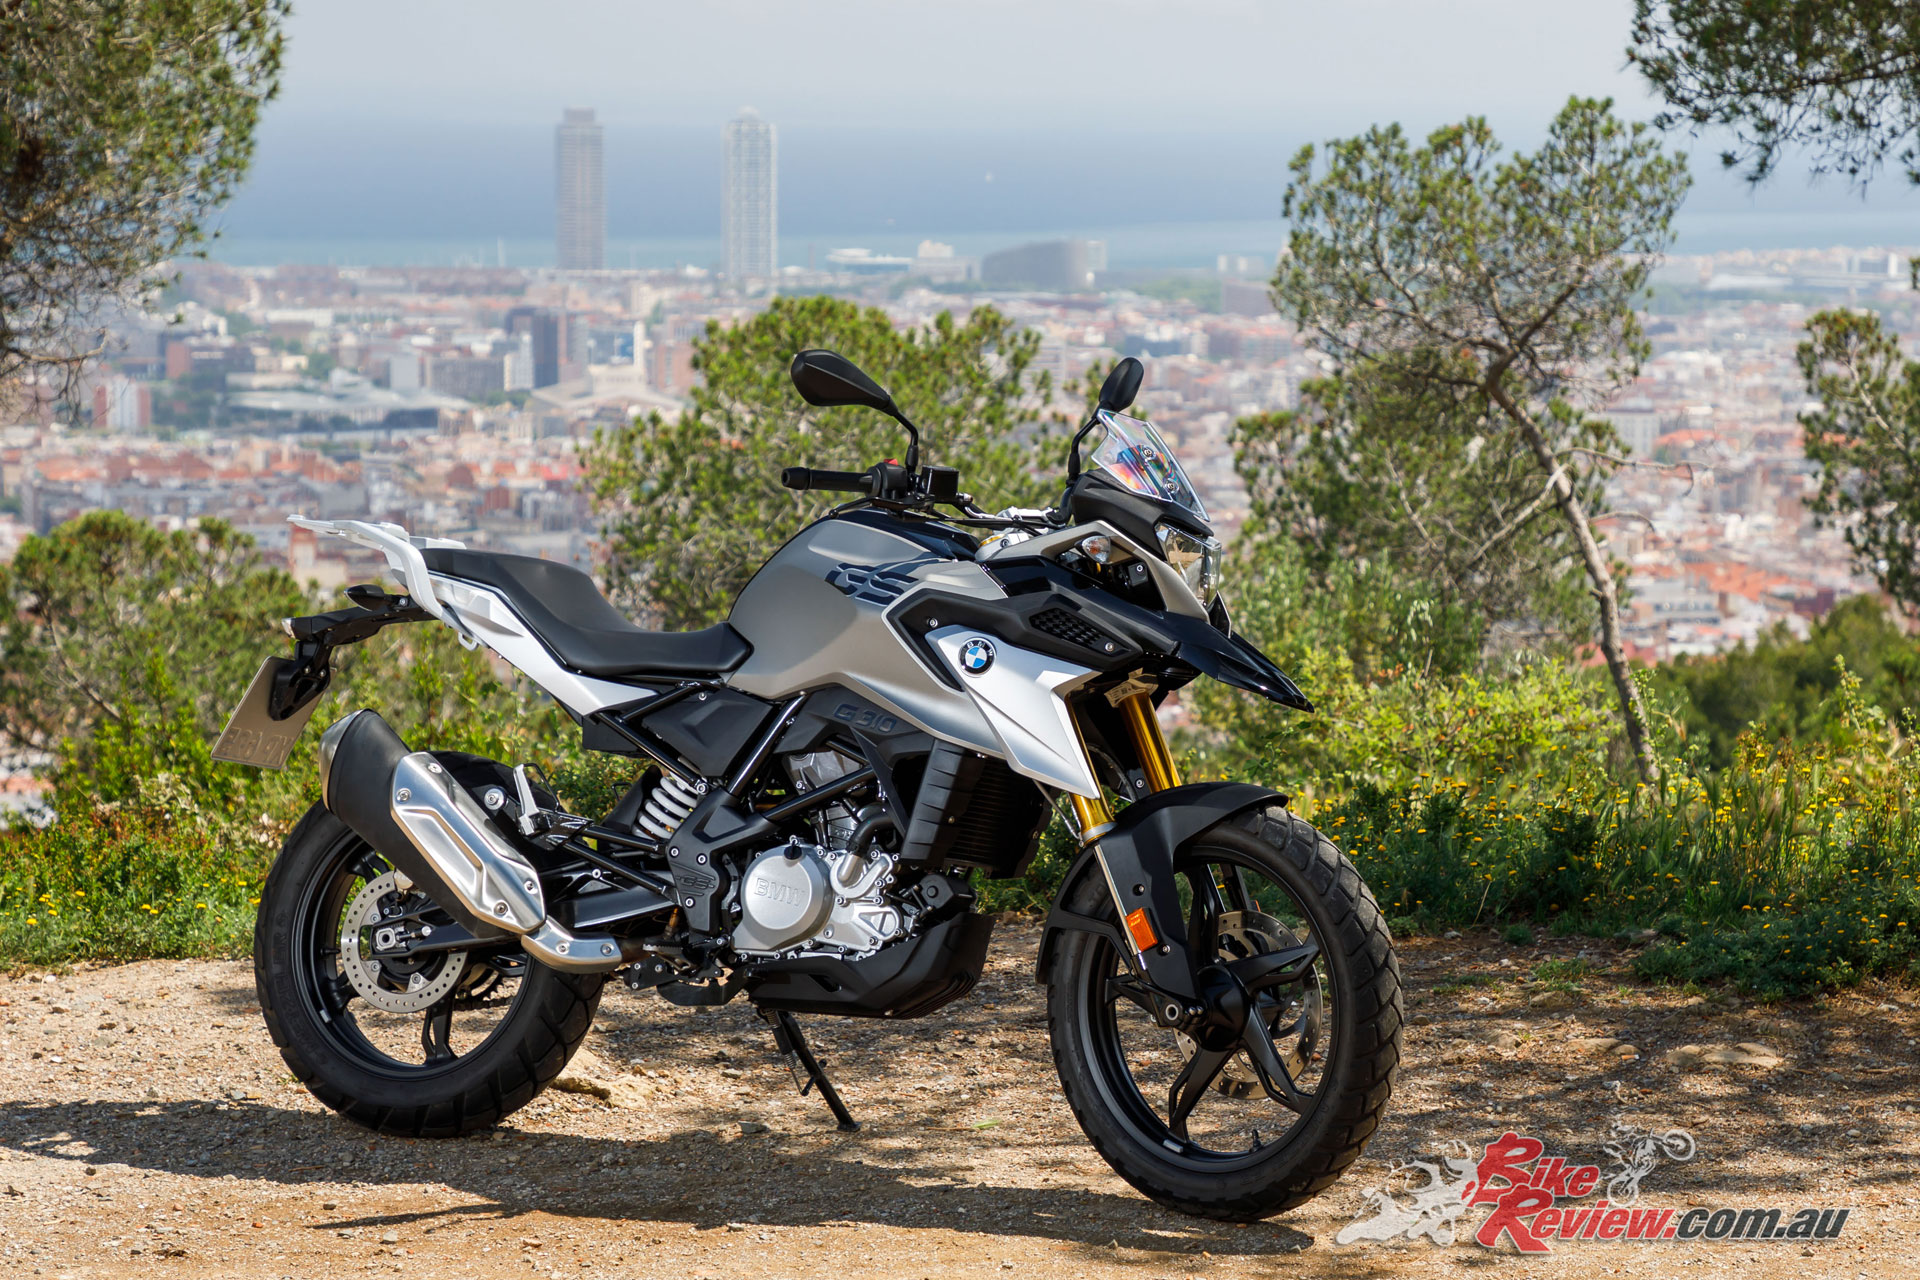 A stylish light weight offering the G 310 GS offers the expected BMW build quality at a low buy-in